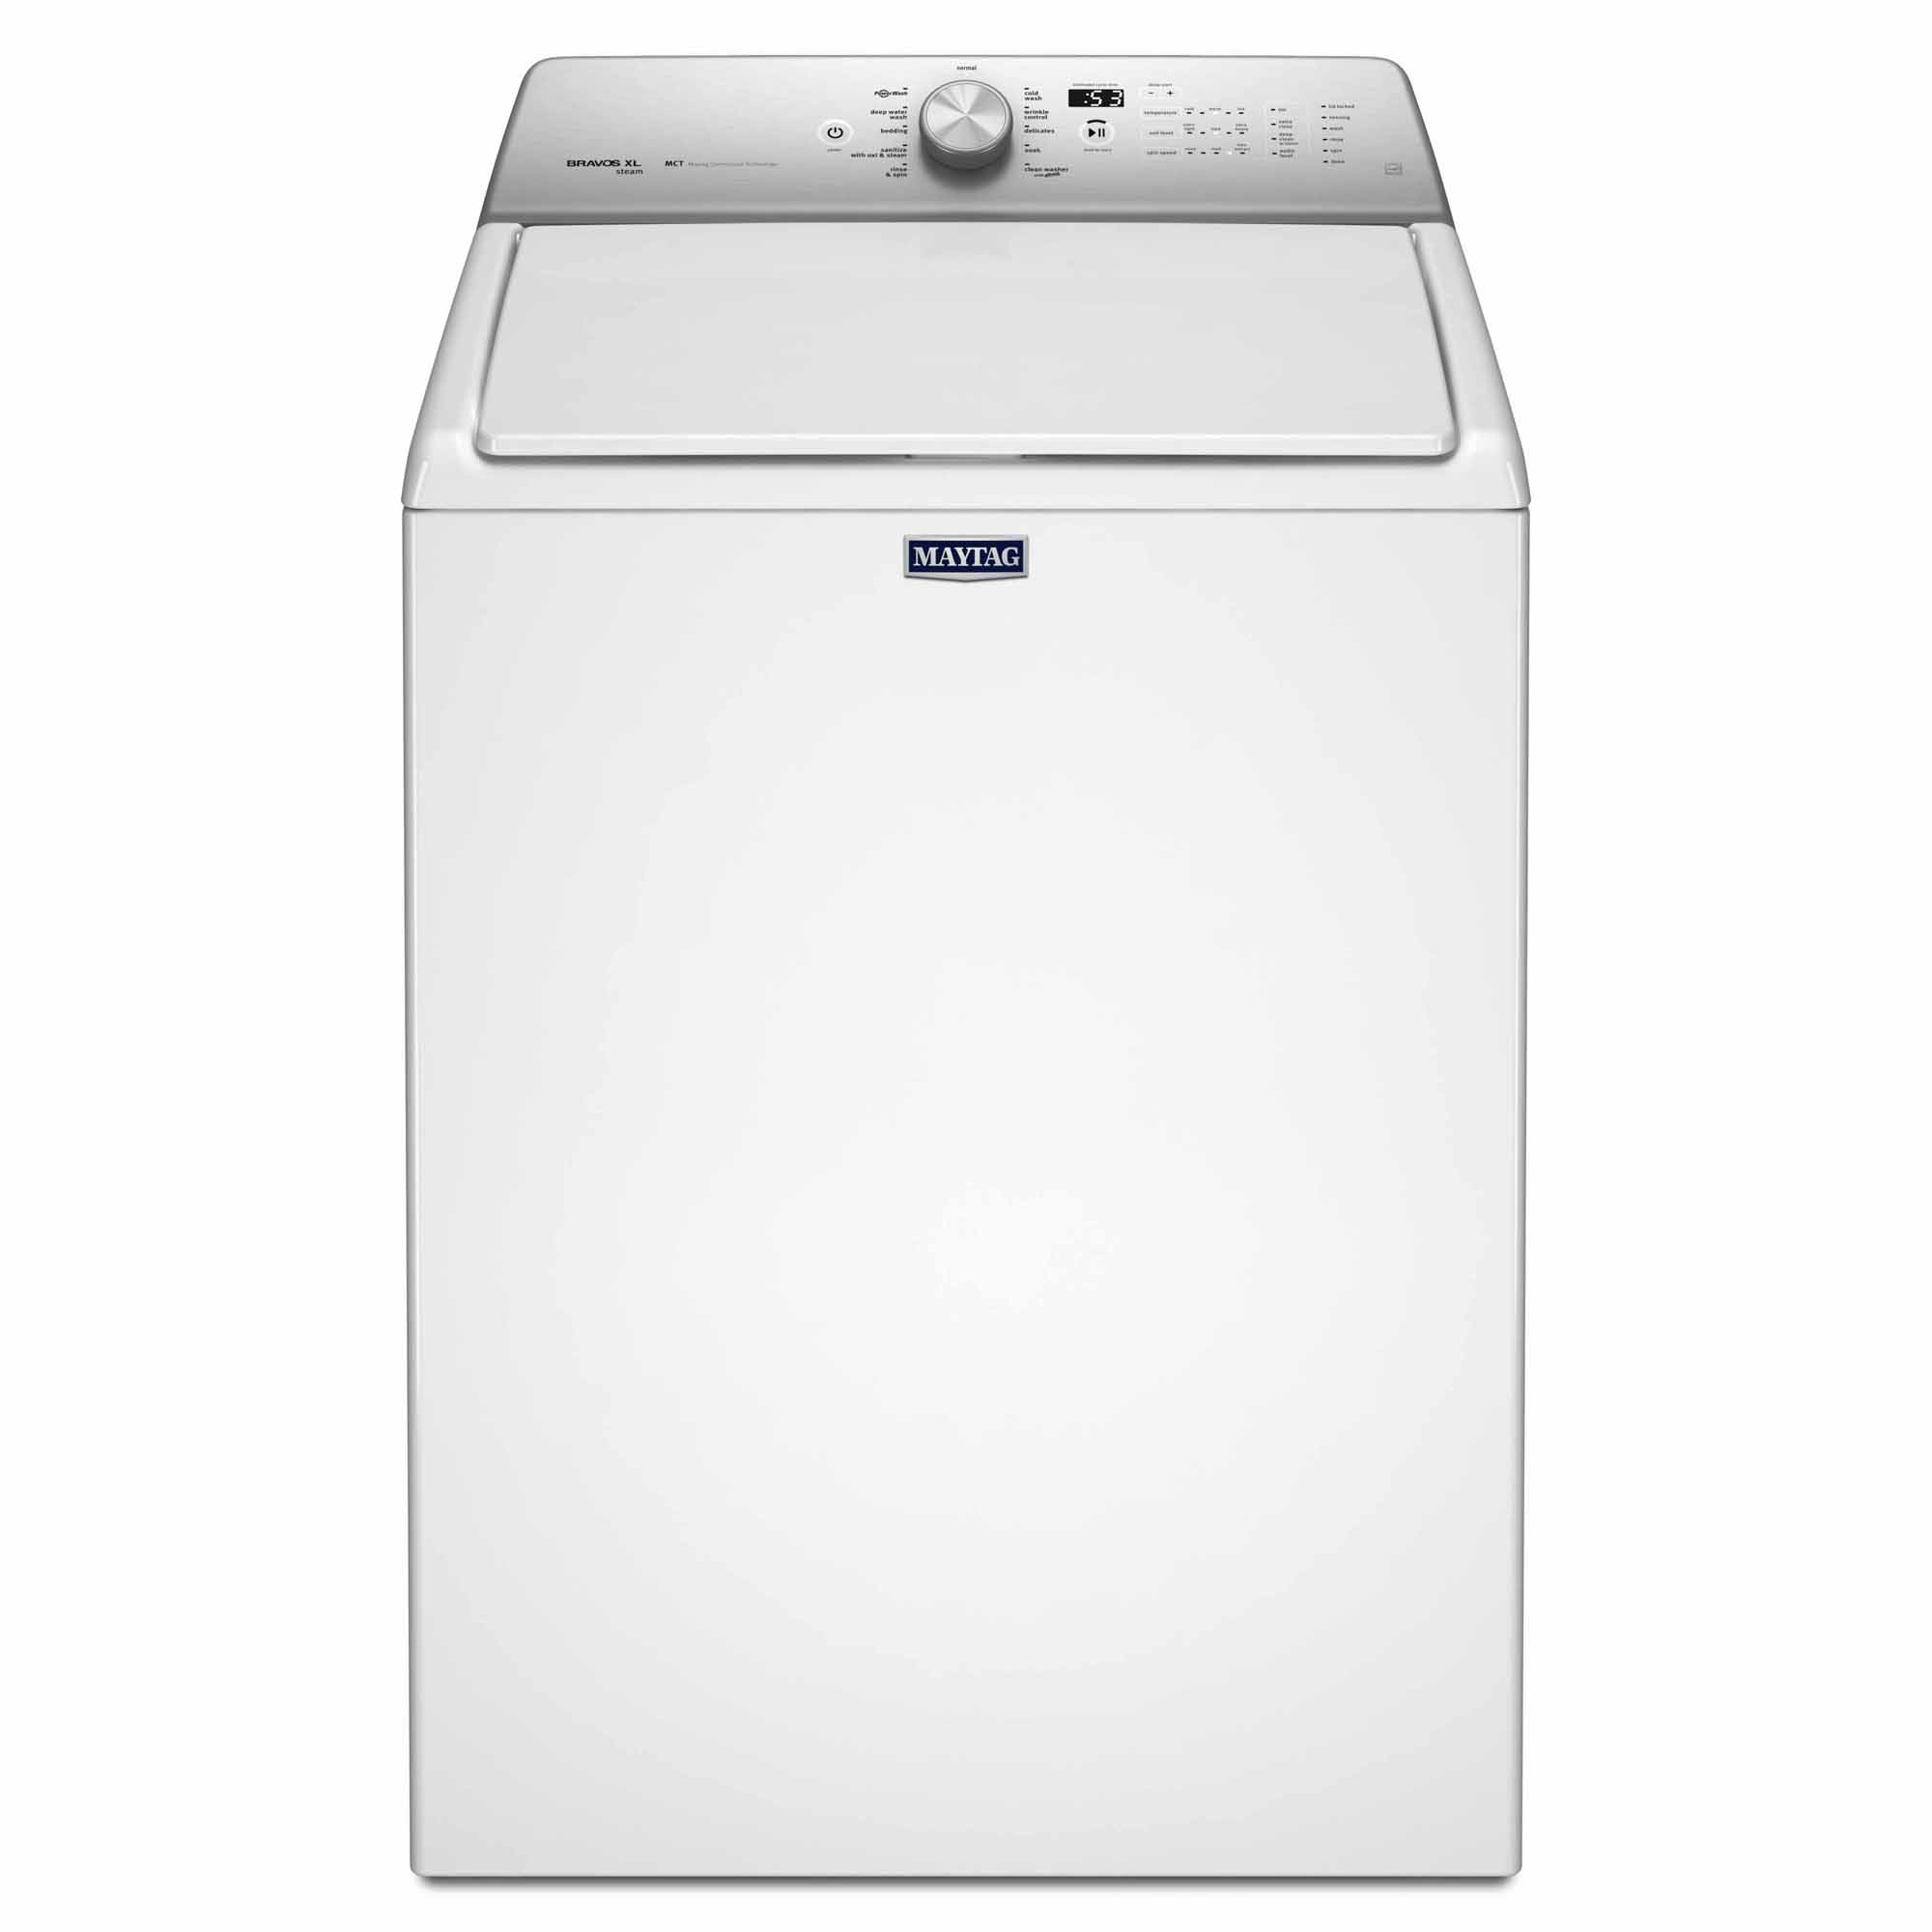 UPC 883049330808 product image for 4.8 cu.ft. Maytag® Top Load Washer - White MVWB755DW | upcitemdb.com